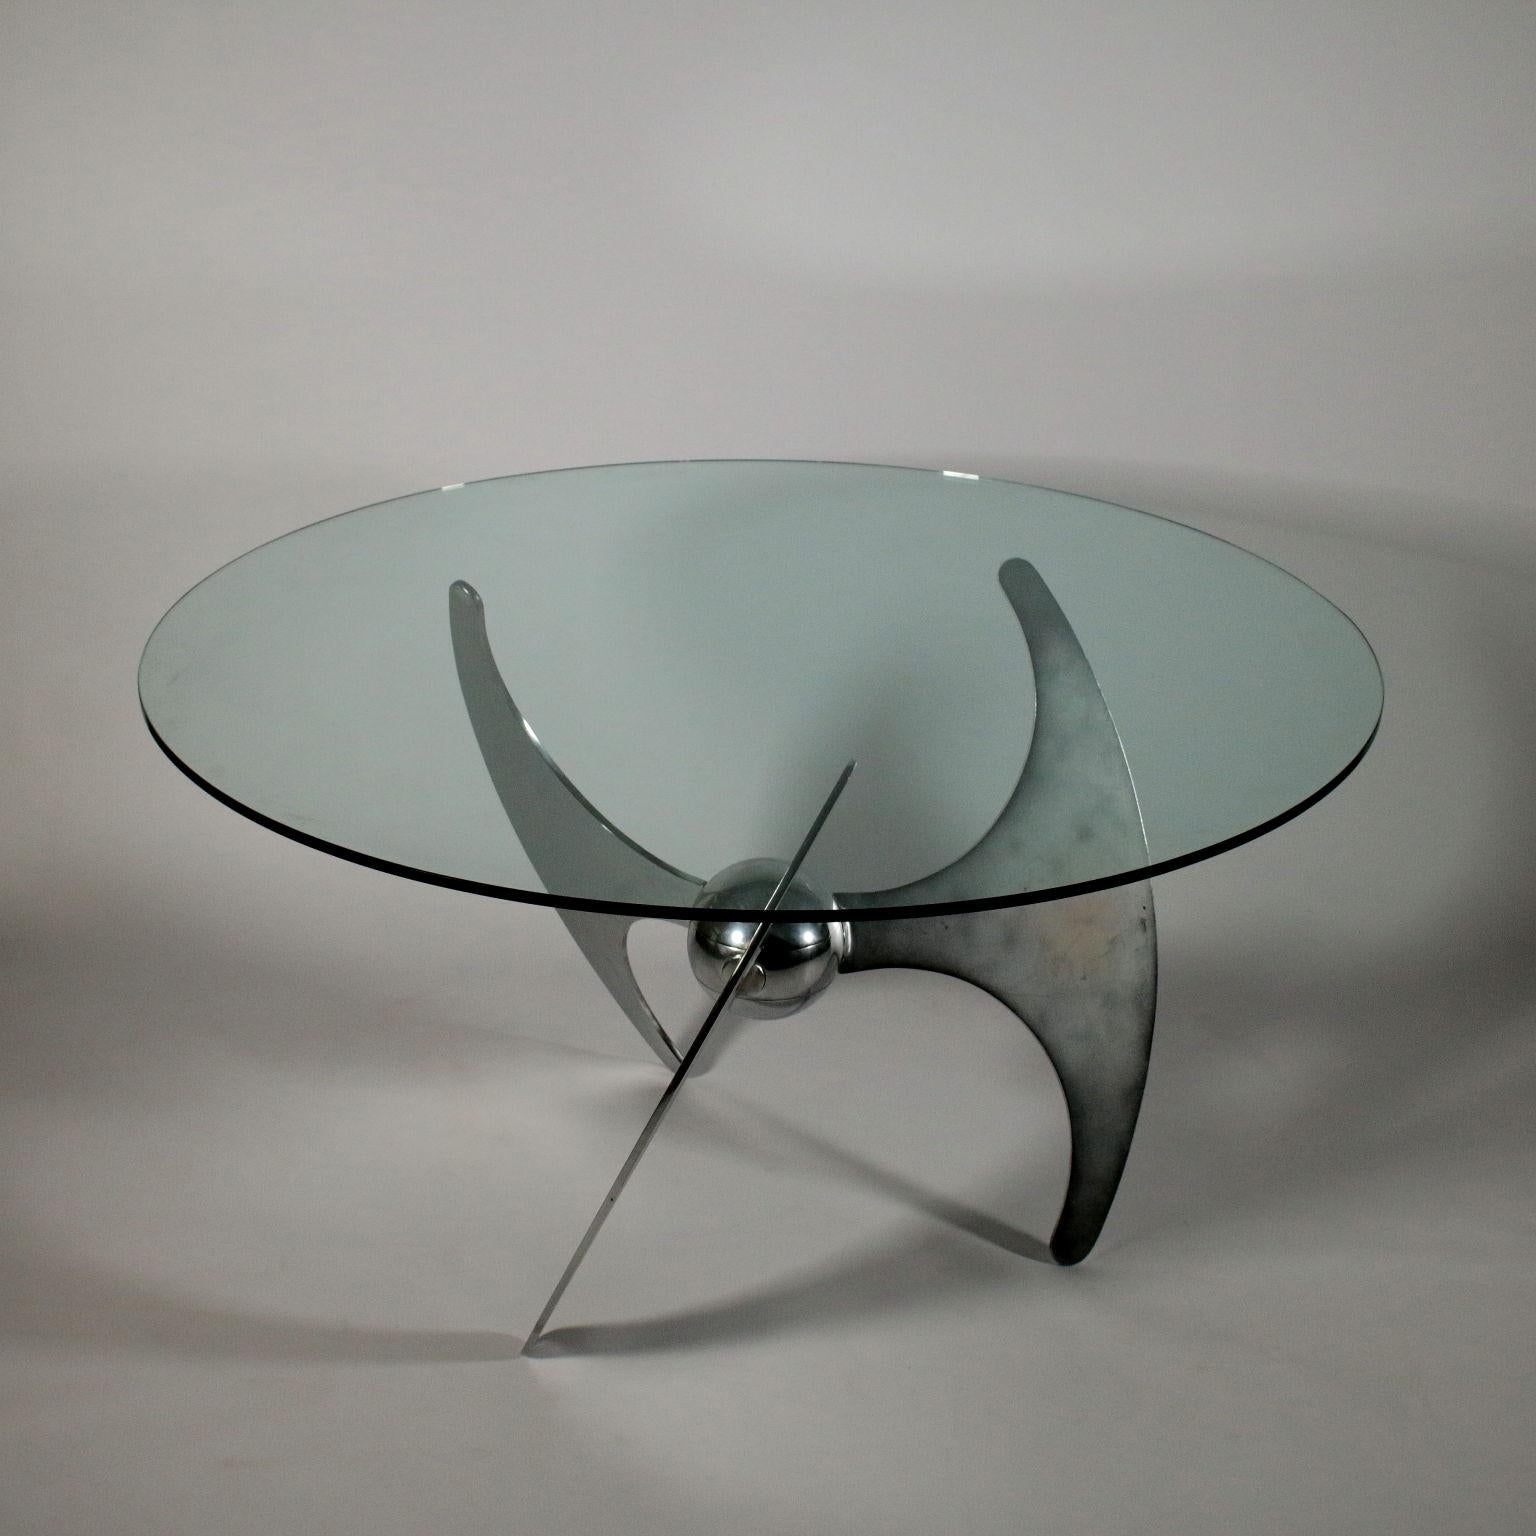 Italian Table by Luciano Campanini Chromed Metal Glass Vintage, Italy, 1970s